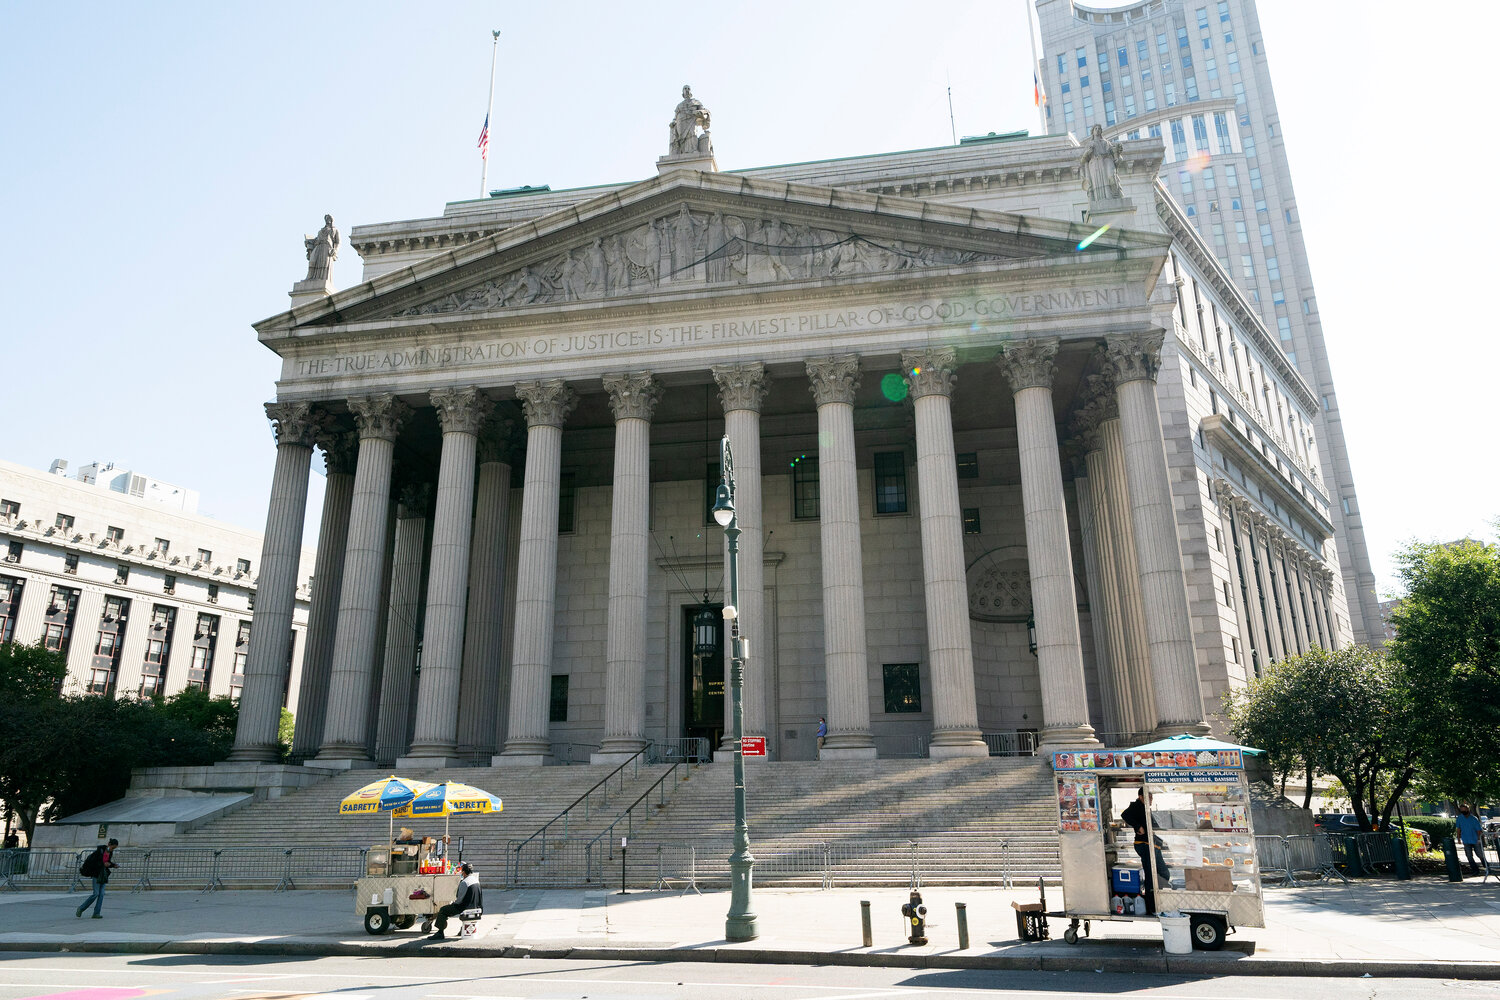 The New York State Supreme Court Building, originally known as the New York County Courthouse, on Centre Street on Manhattan's Foley Square.